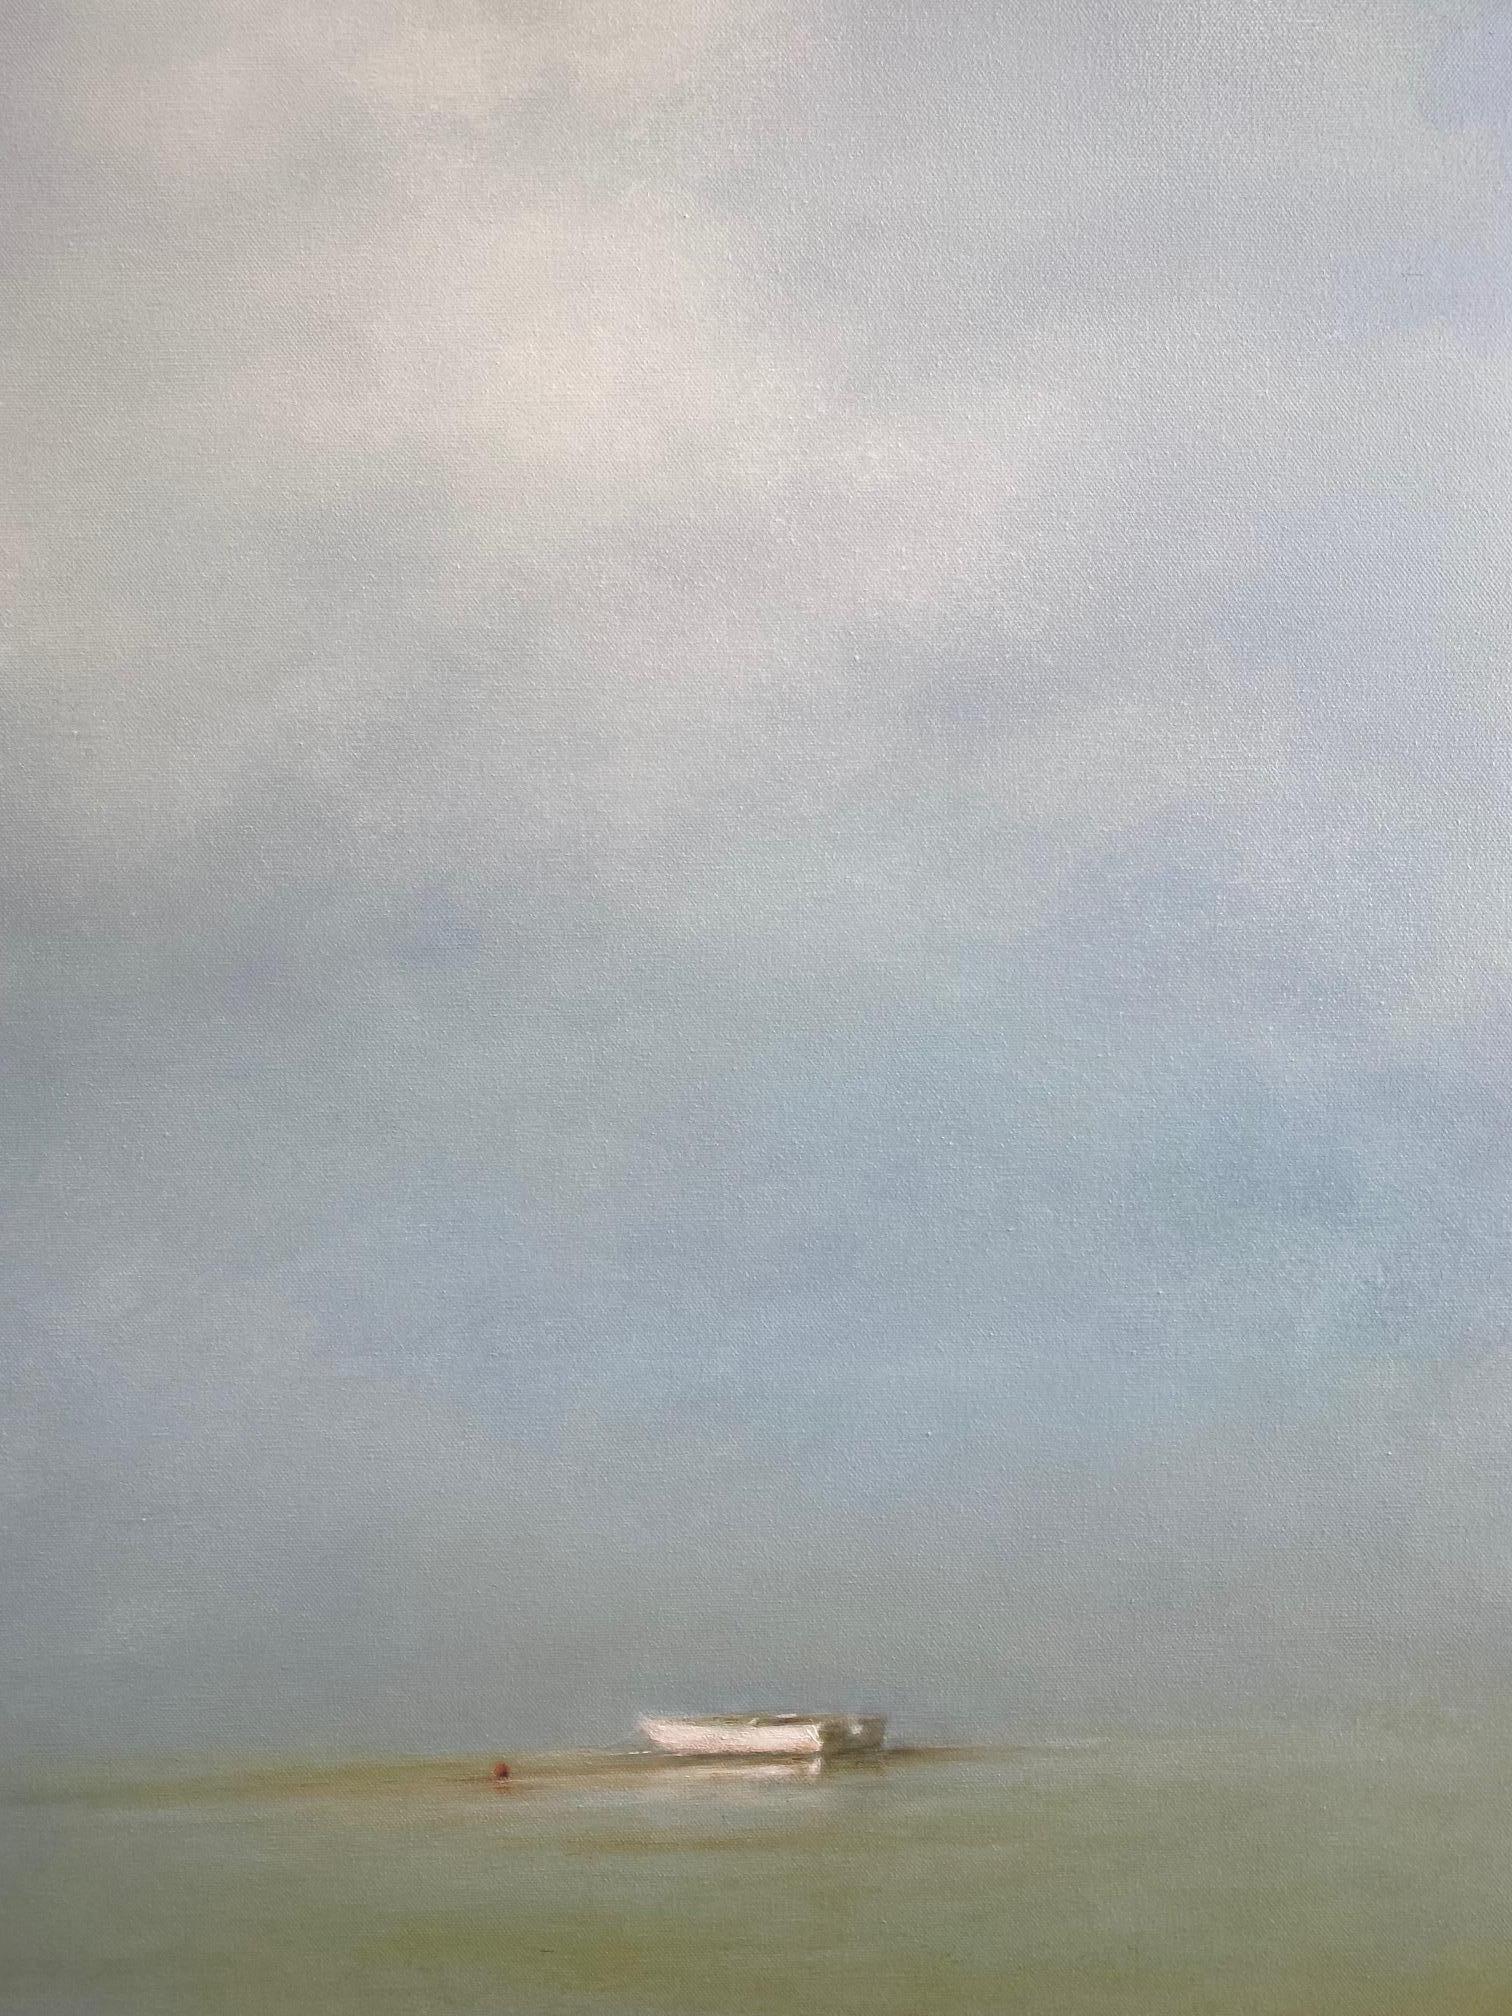 Dinghy at Sea, 40x30 original contemporary marine landscape - Painting by Chieh-Nie Cherng